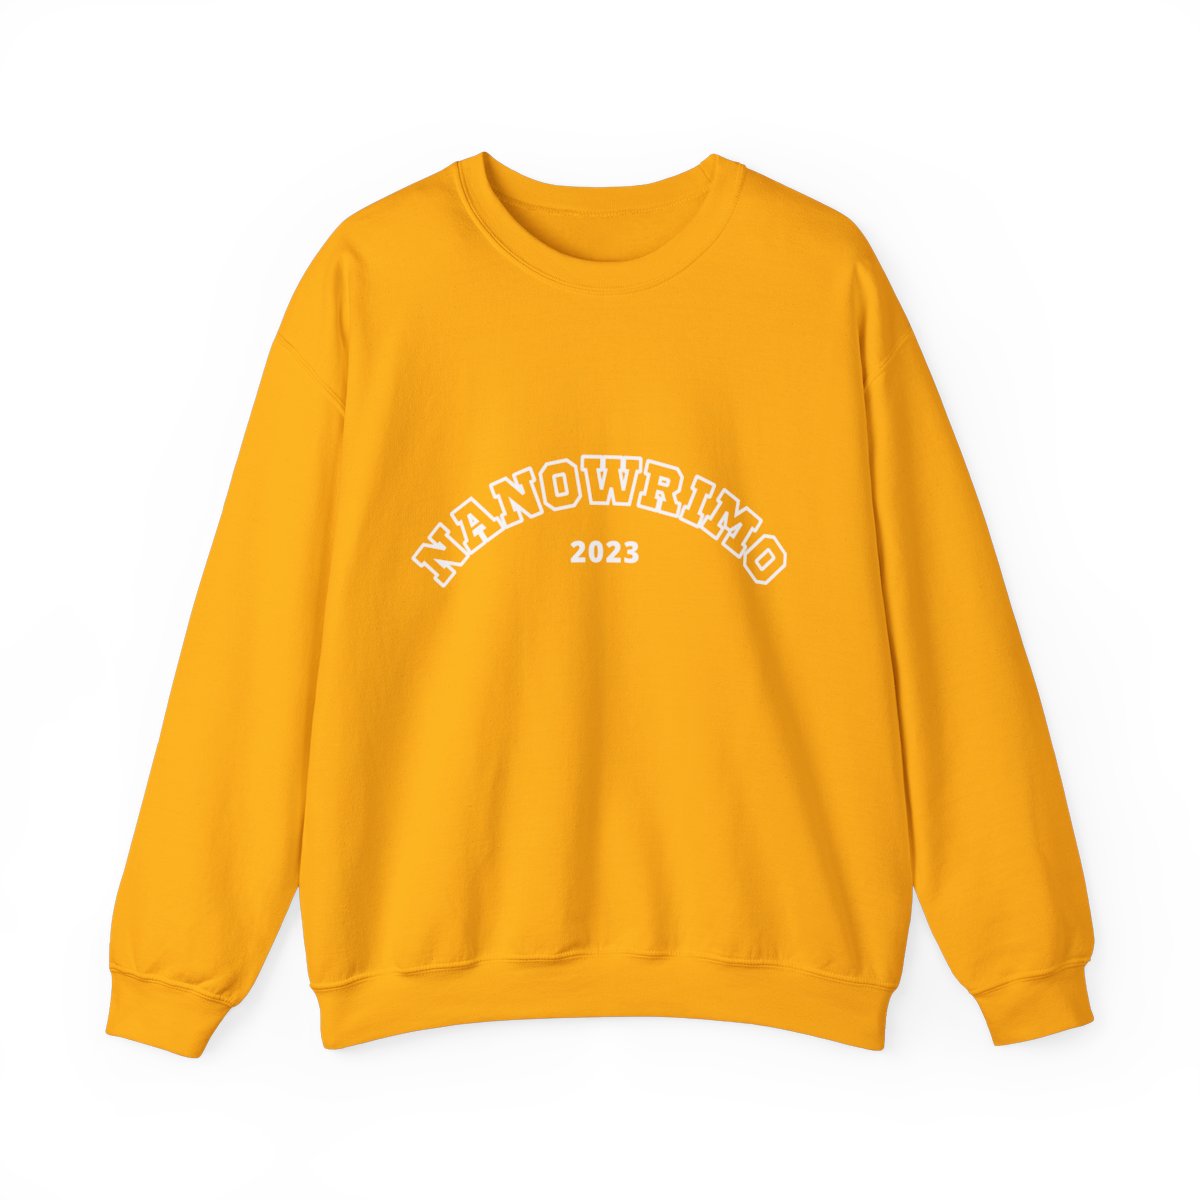 NaNoWriMo 2023 Unisex Crewneck Sweatshirt for Writers and Authors doing the NaNoWriMo Challenge in 2023 product main image